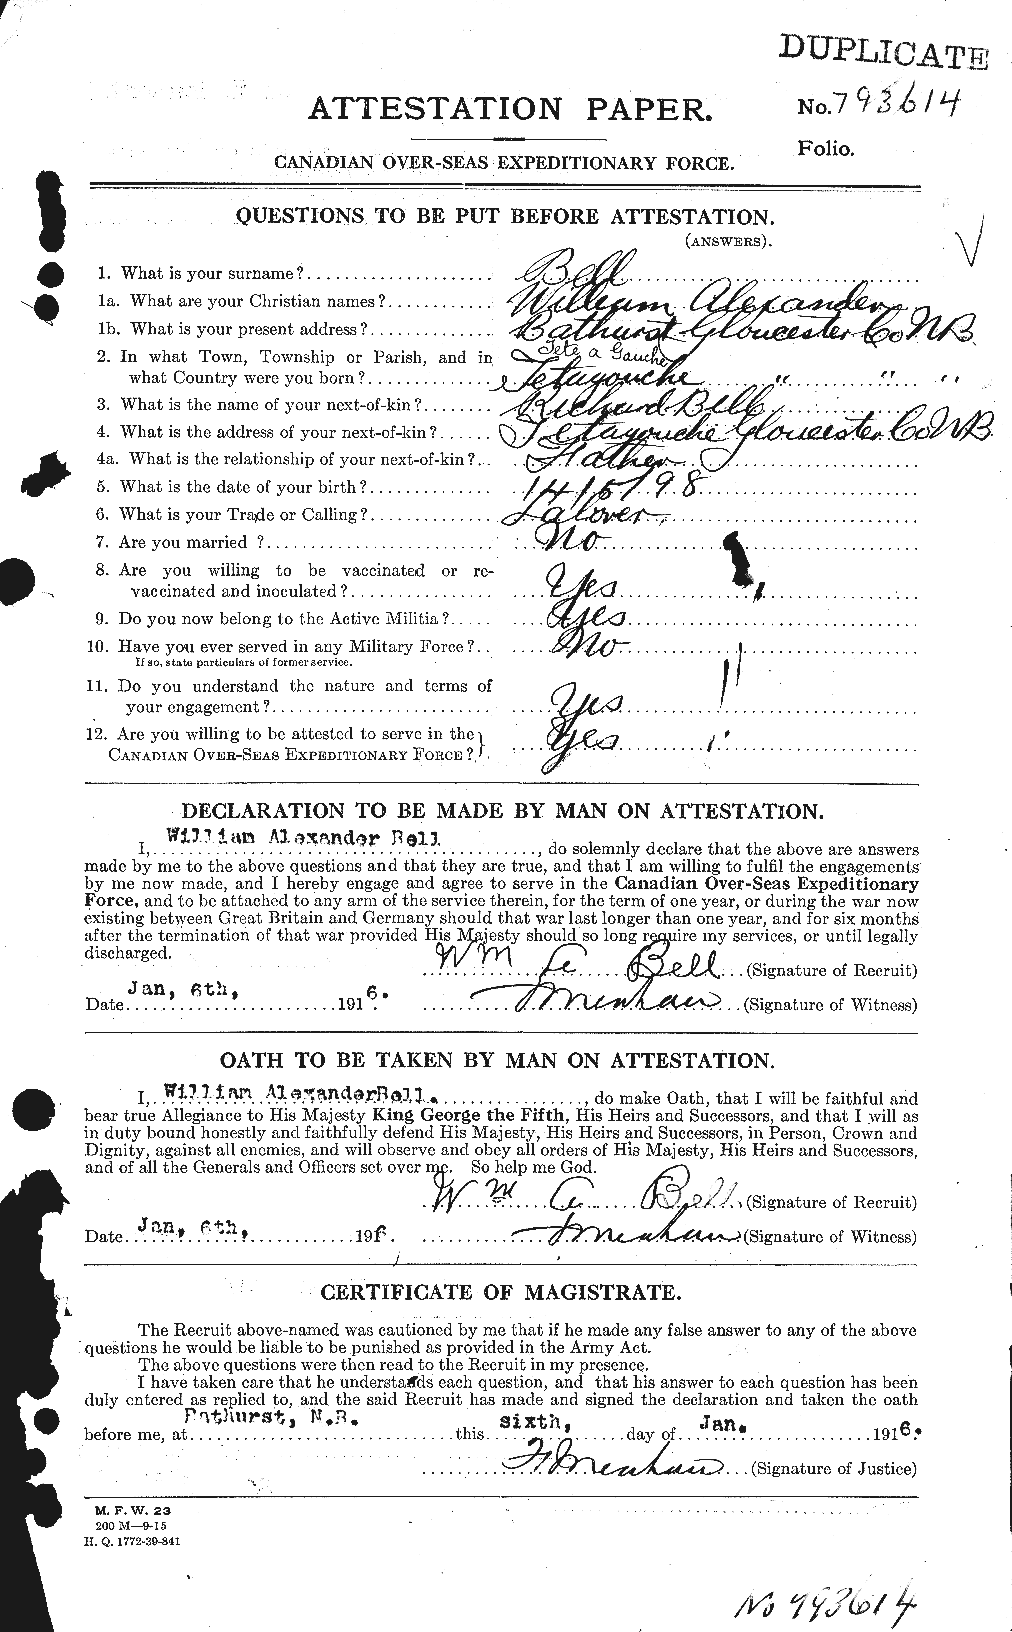 Personnel Records of the First World War - CEF 234859a